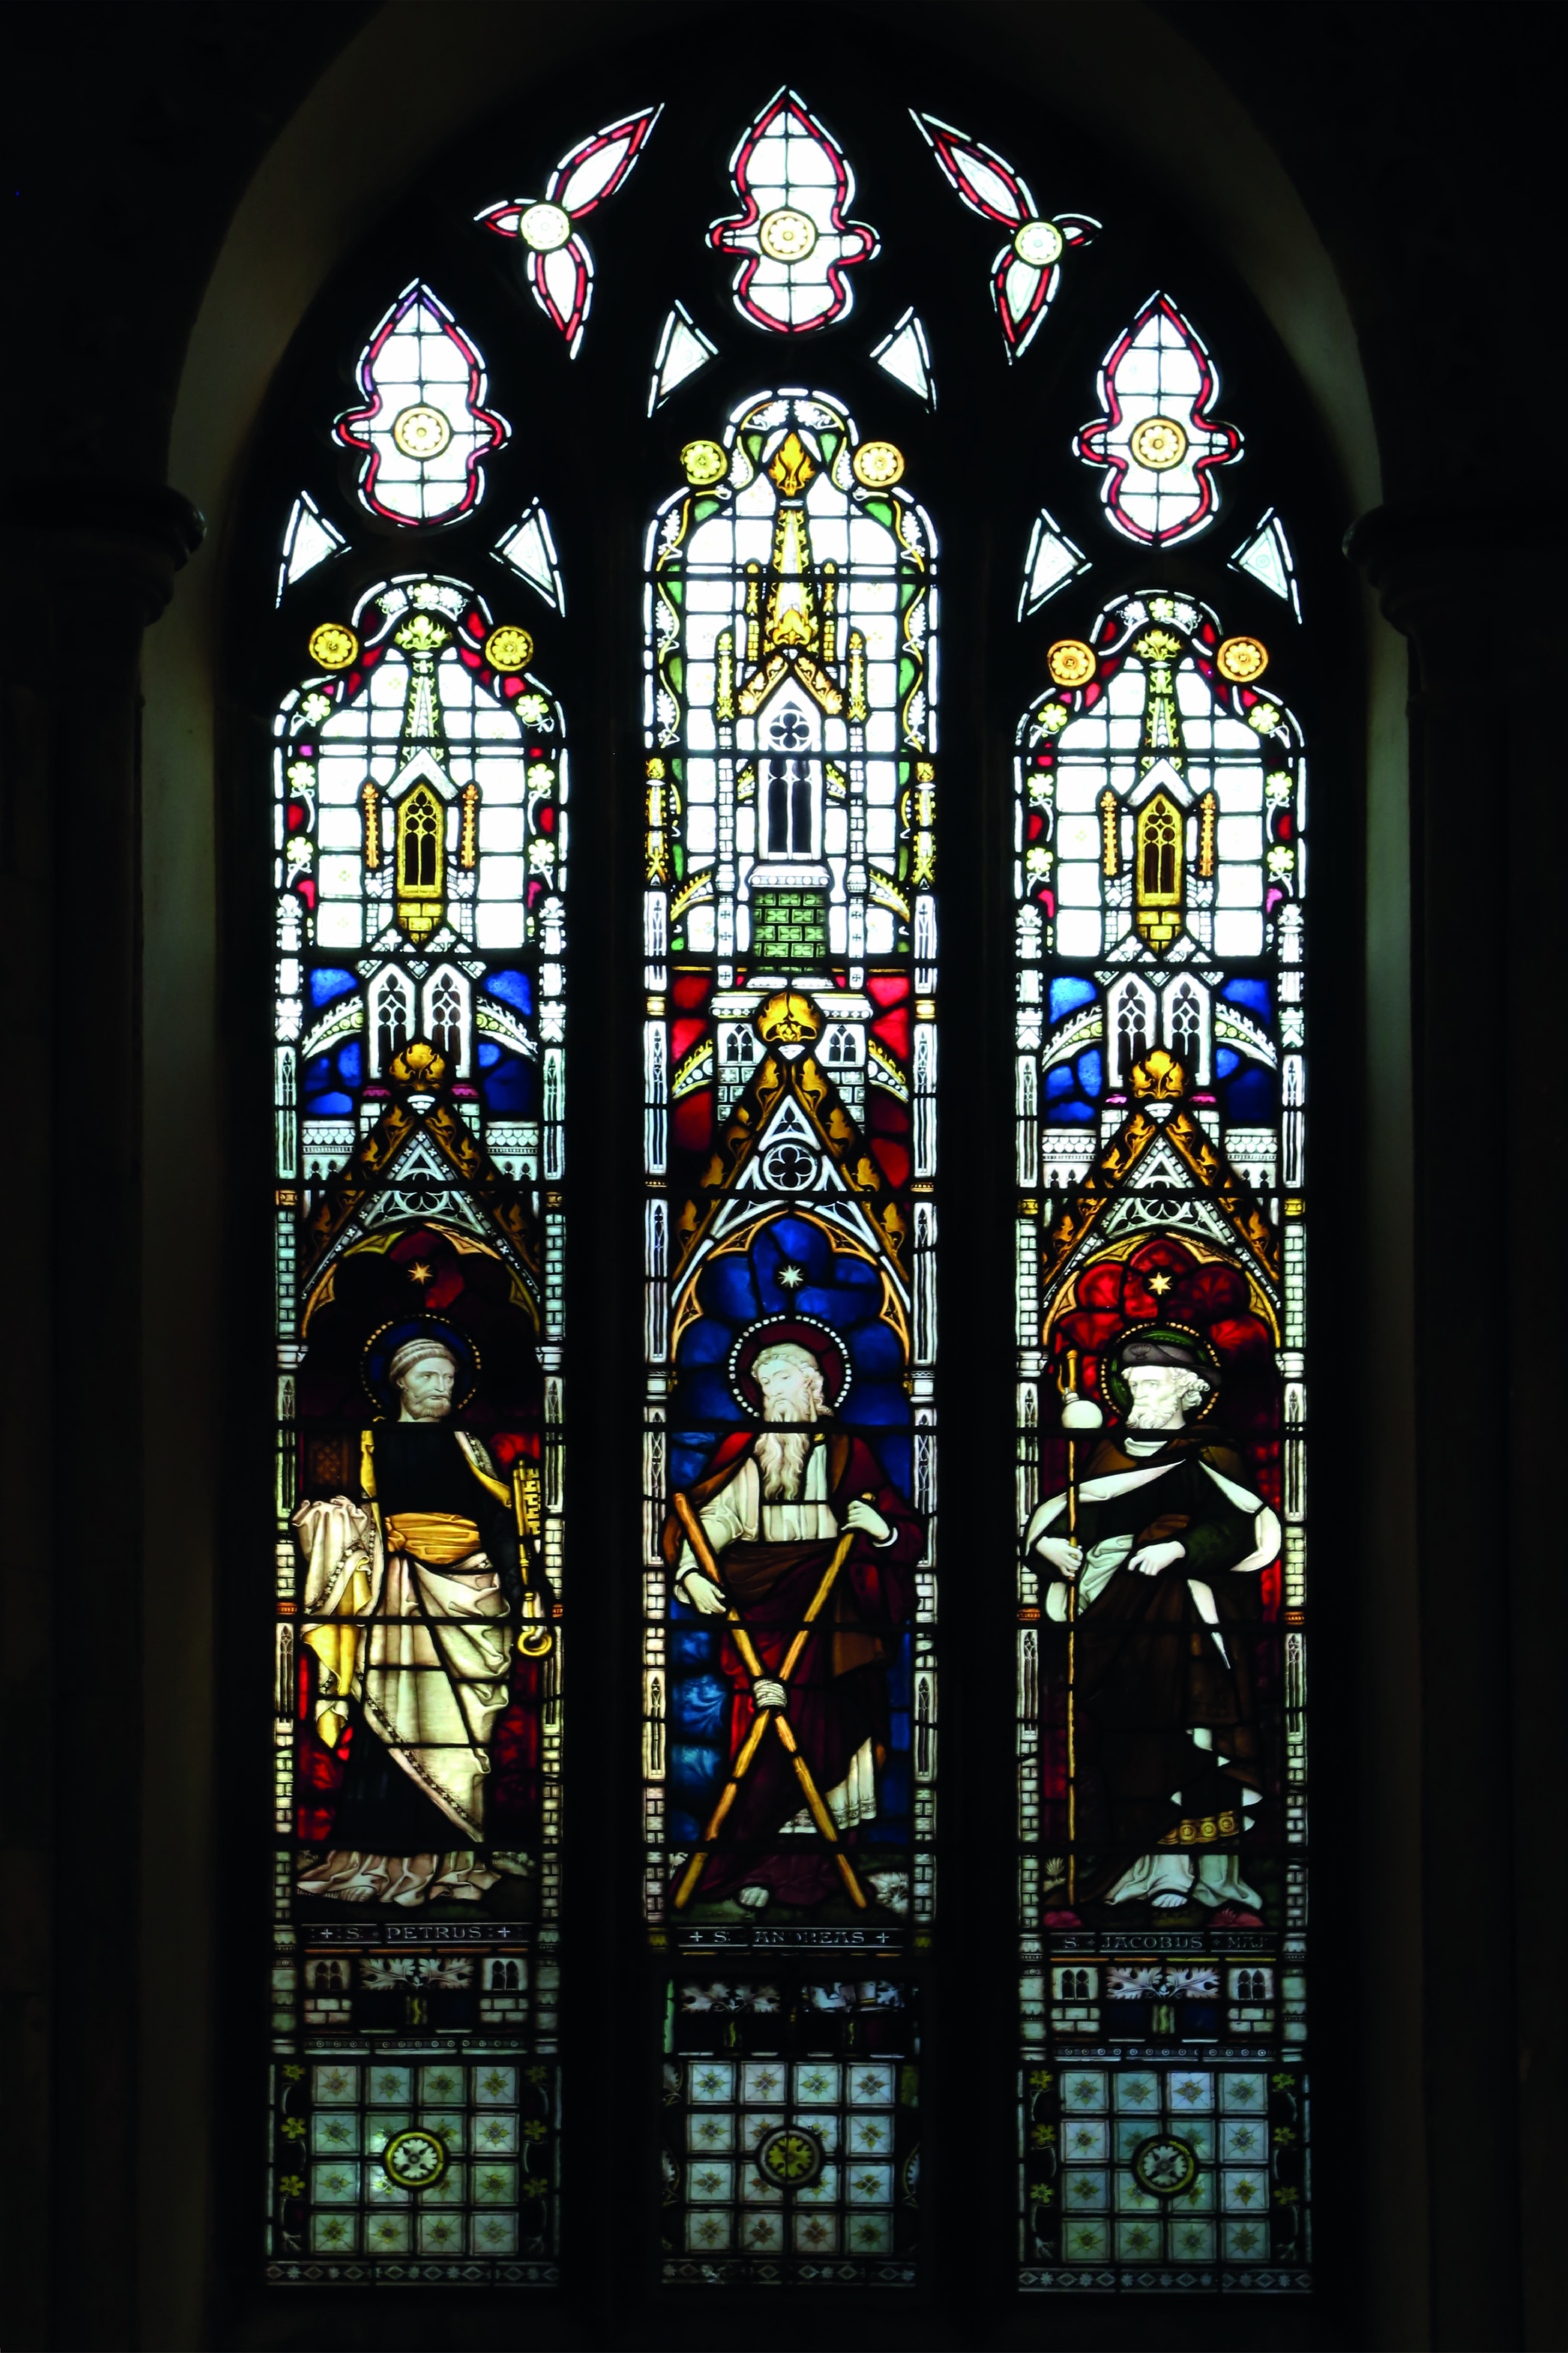 Photograph of the stained glass window dedicated to William Henry Nicholson in the presbytery.